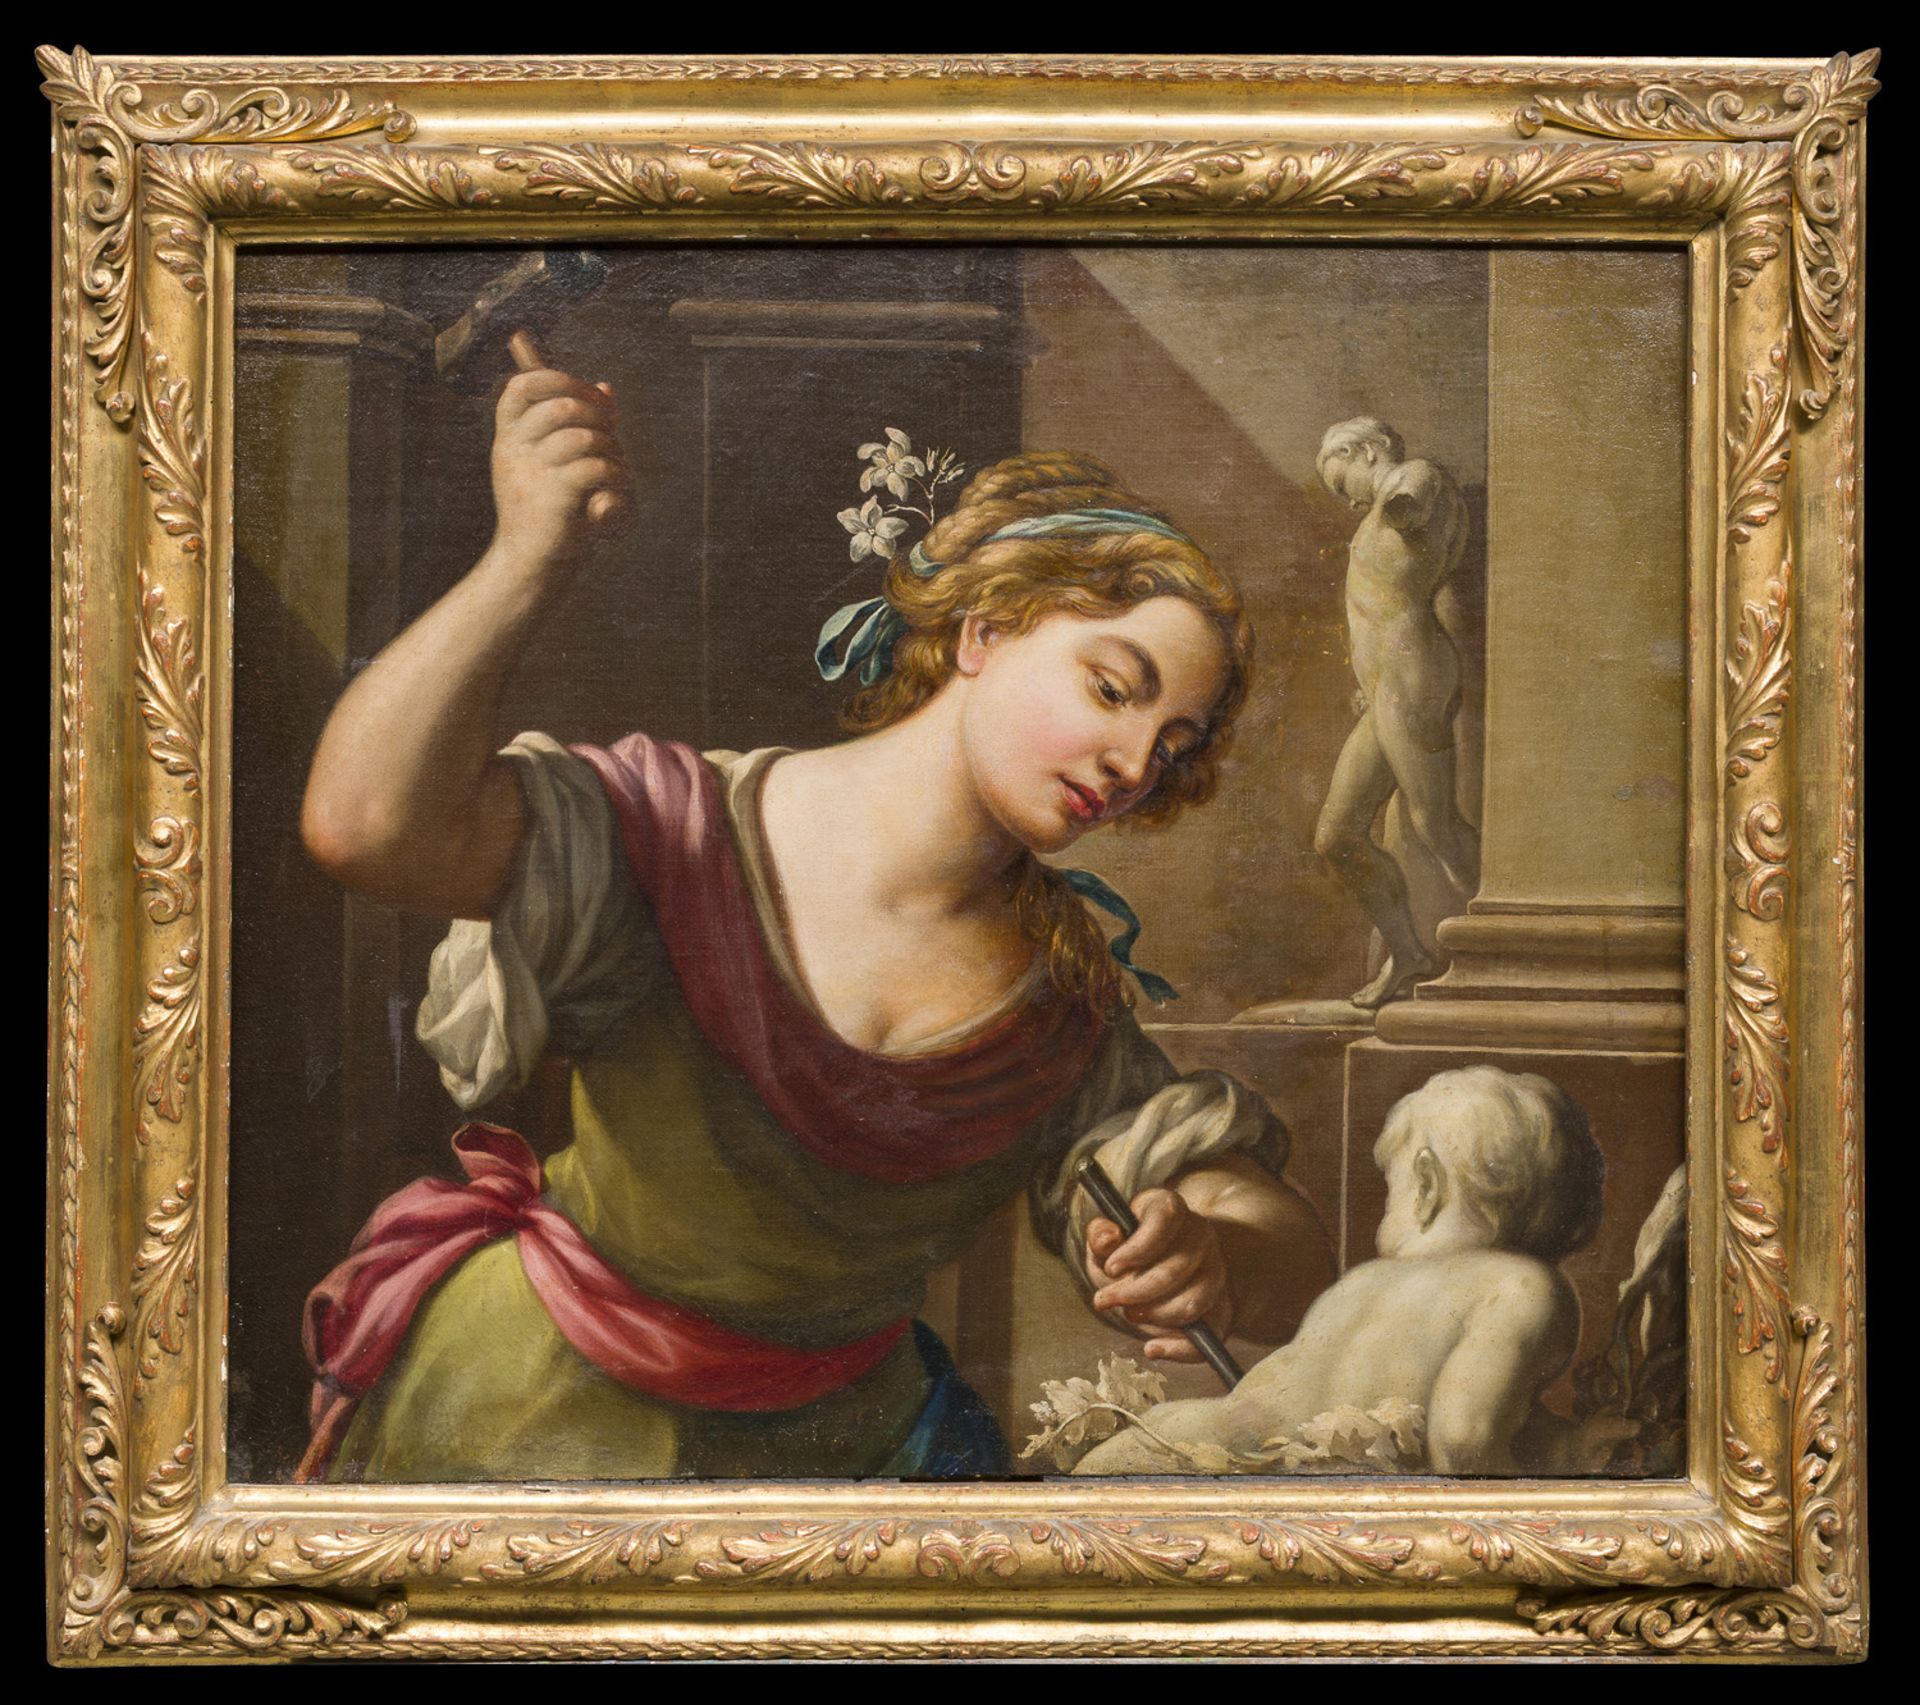 PAIR OF OIL PAINTINGS OF ALLEGORIES FROM THE CIRCLE OF MAURO GANDOLFI (1734-1802)